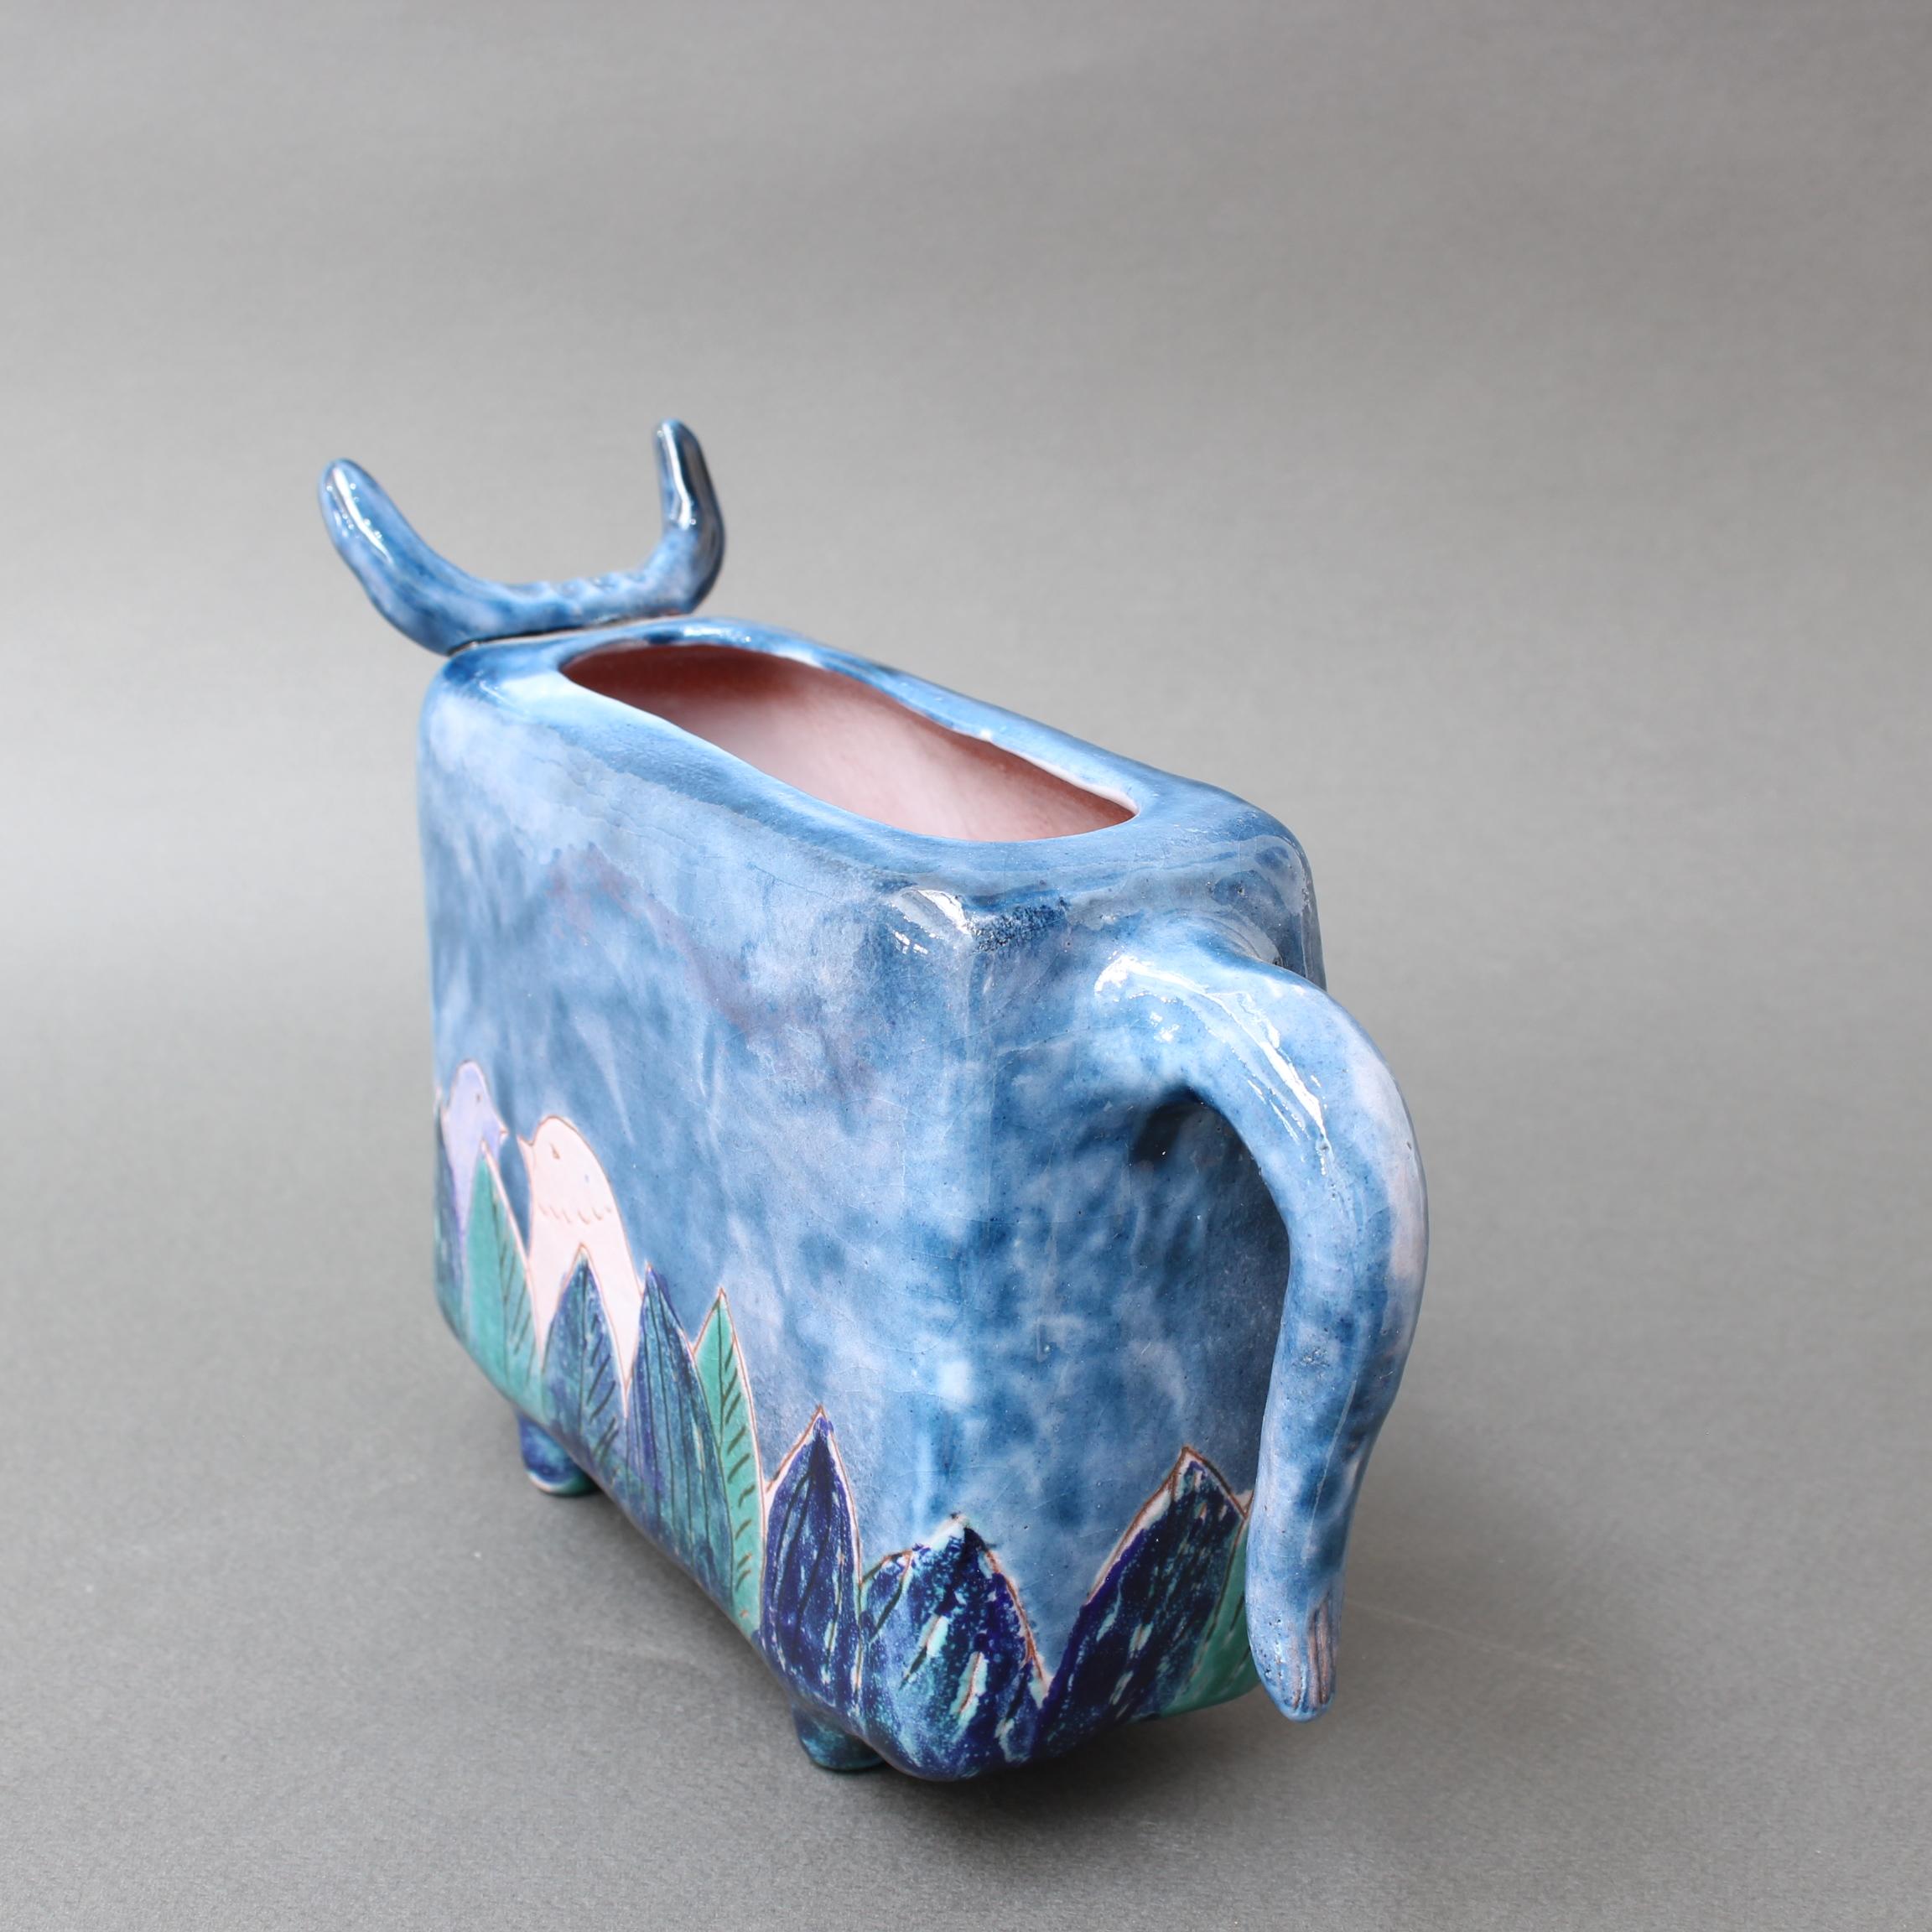 Hand-Painted Vintage Ceramic Zoomorphic Flower Vase by the Cloutier Brothers 'circa 1970s'